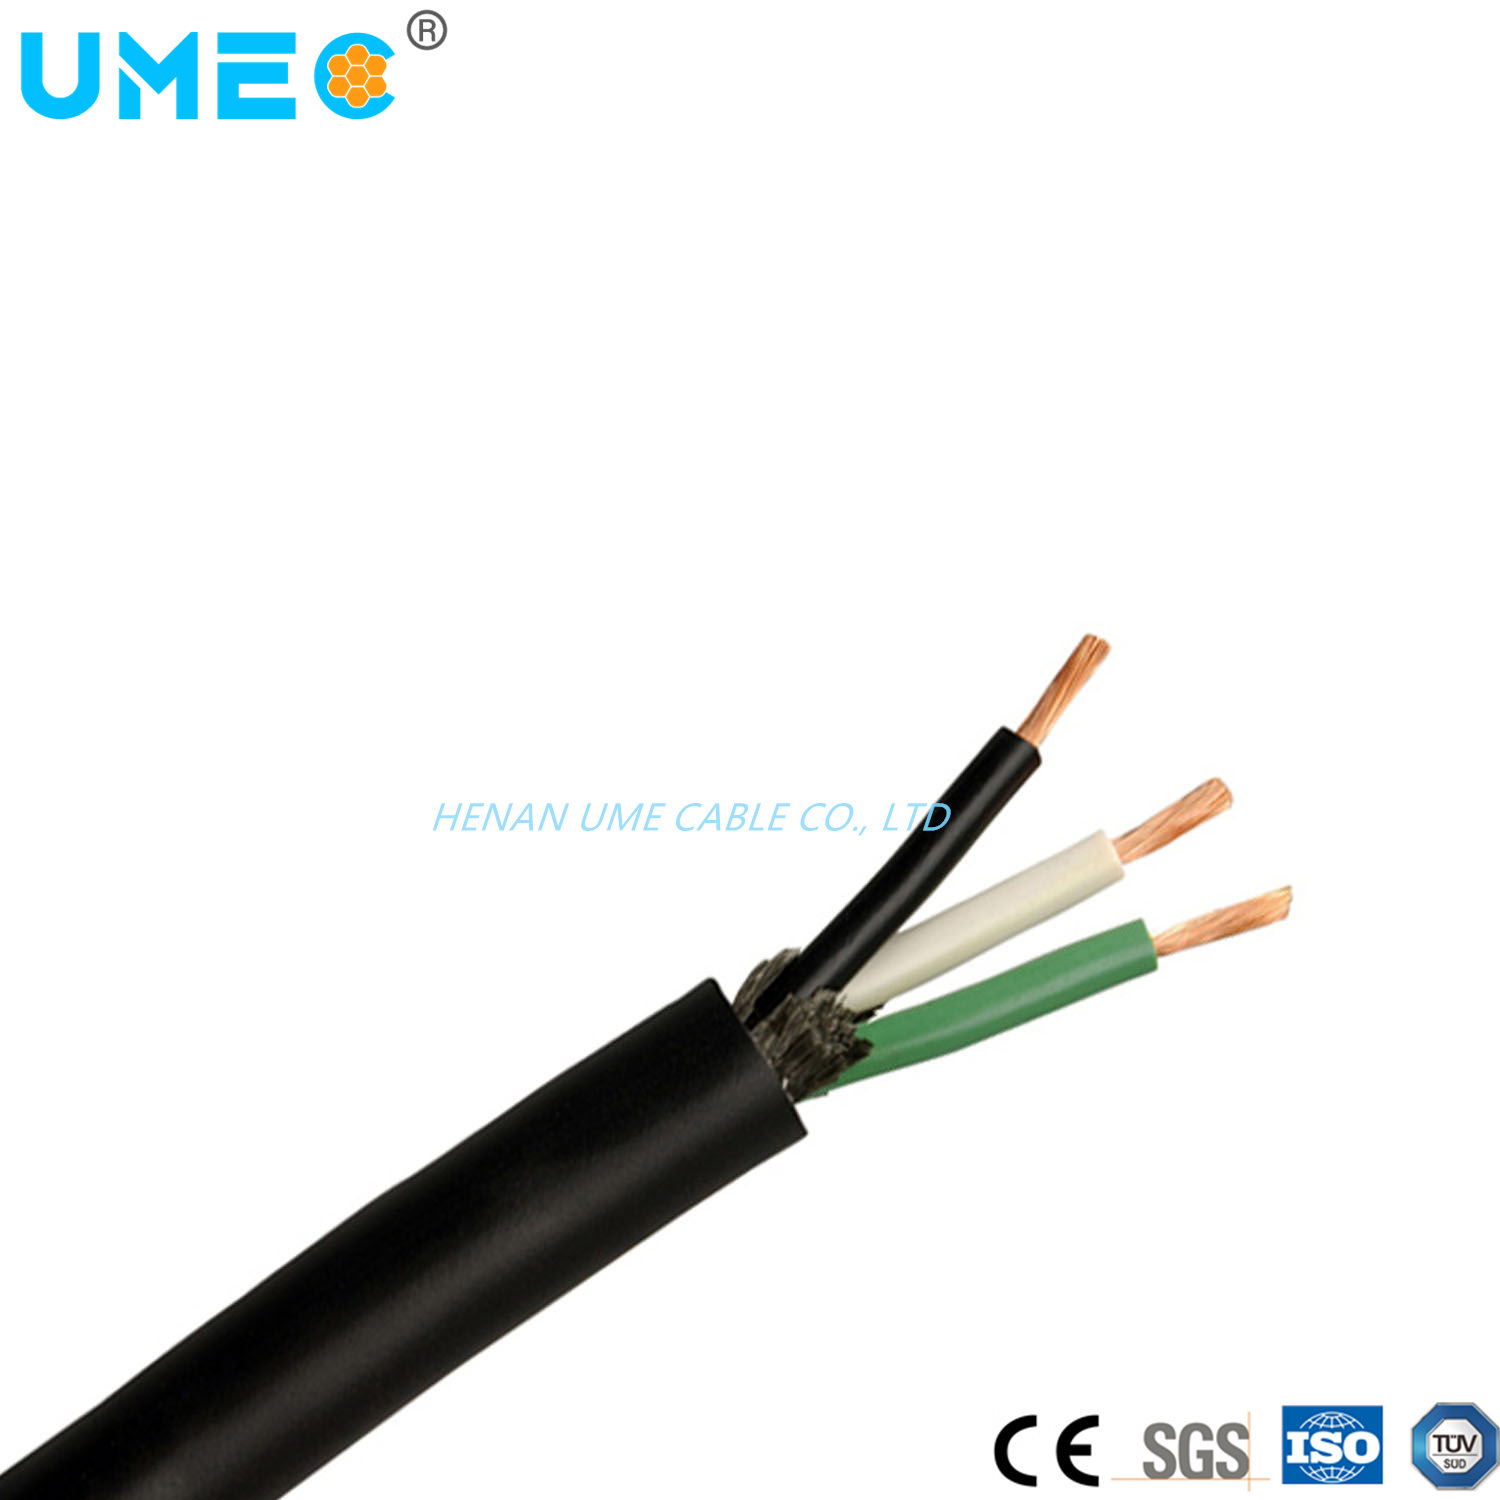 So Sow Soow Sjoow Cable for USA Standard 3/4/5/6/7 Core Flexible Electric Wire Cable with Low Price